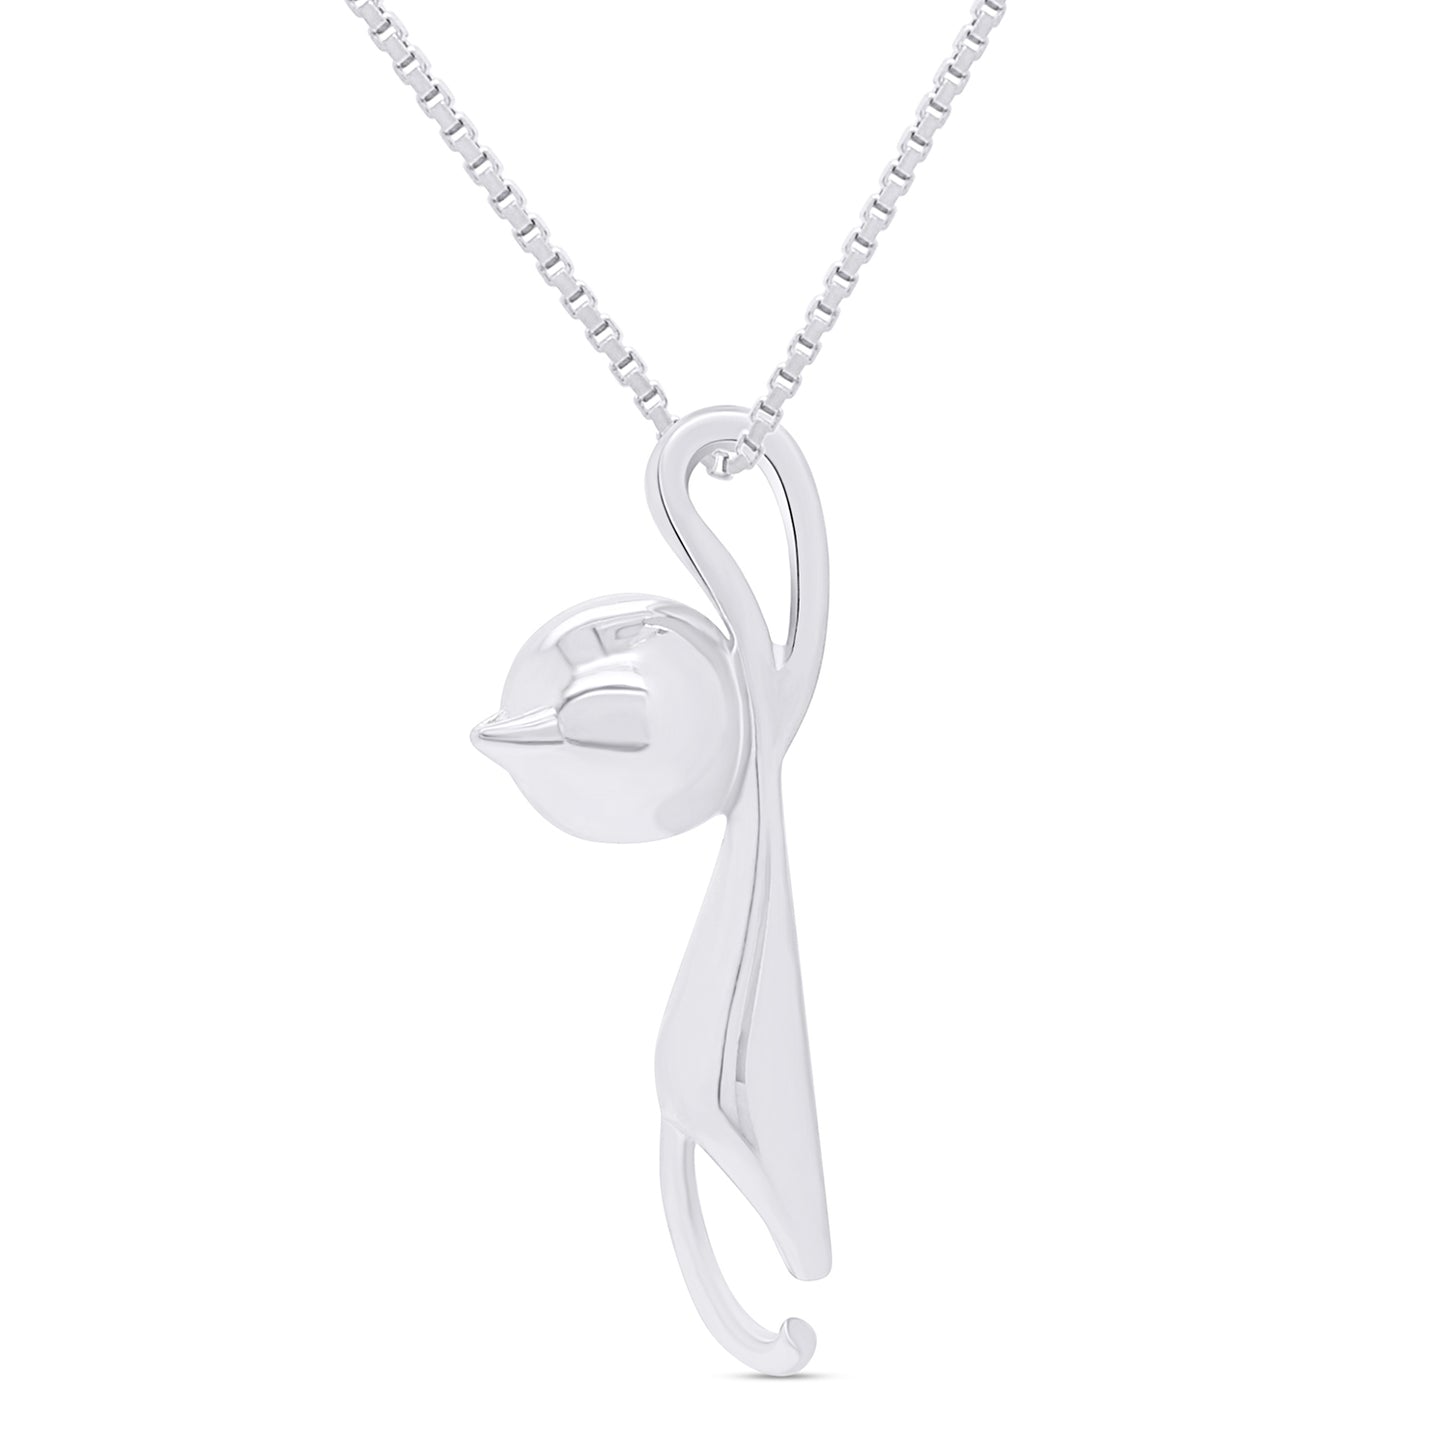 Flying Hanging Cat Pendant Necklace For Women In 925 Sterling Silver